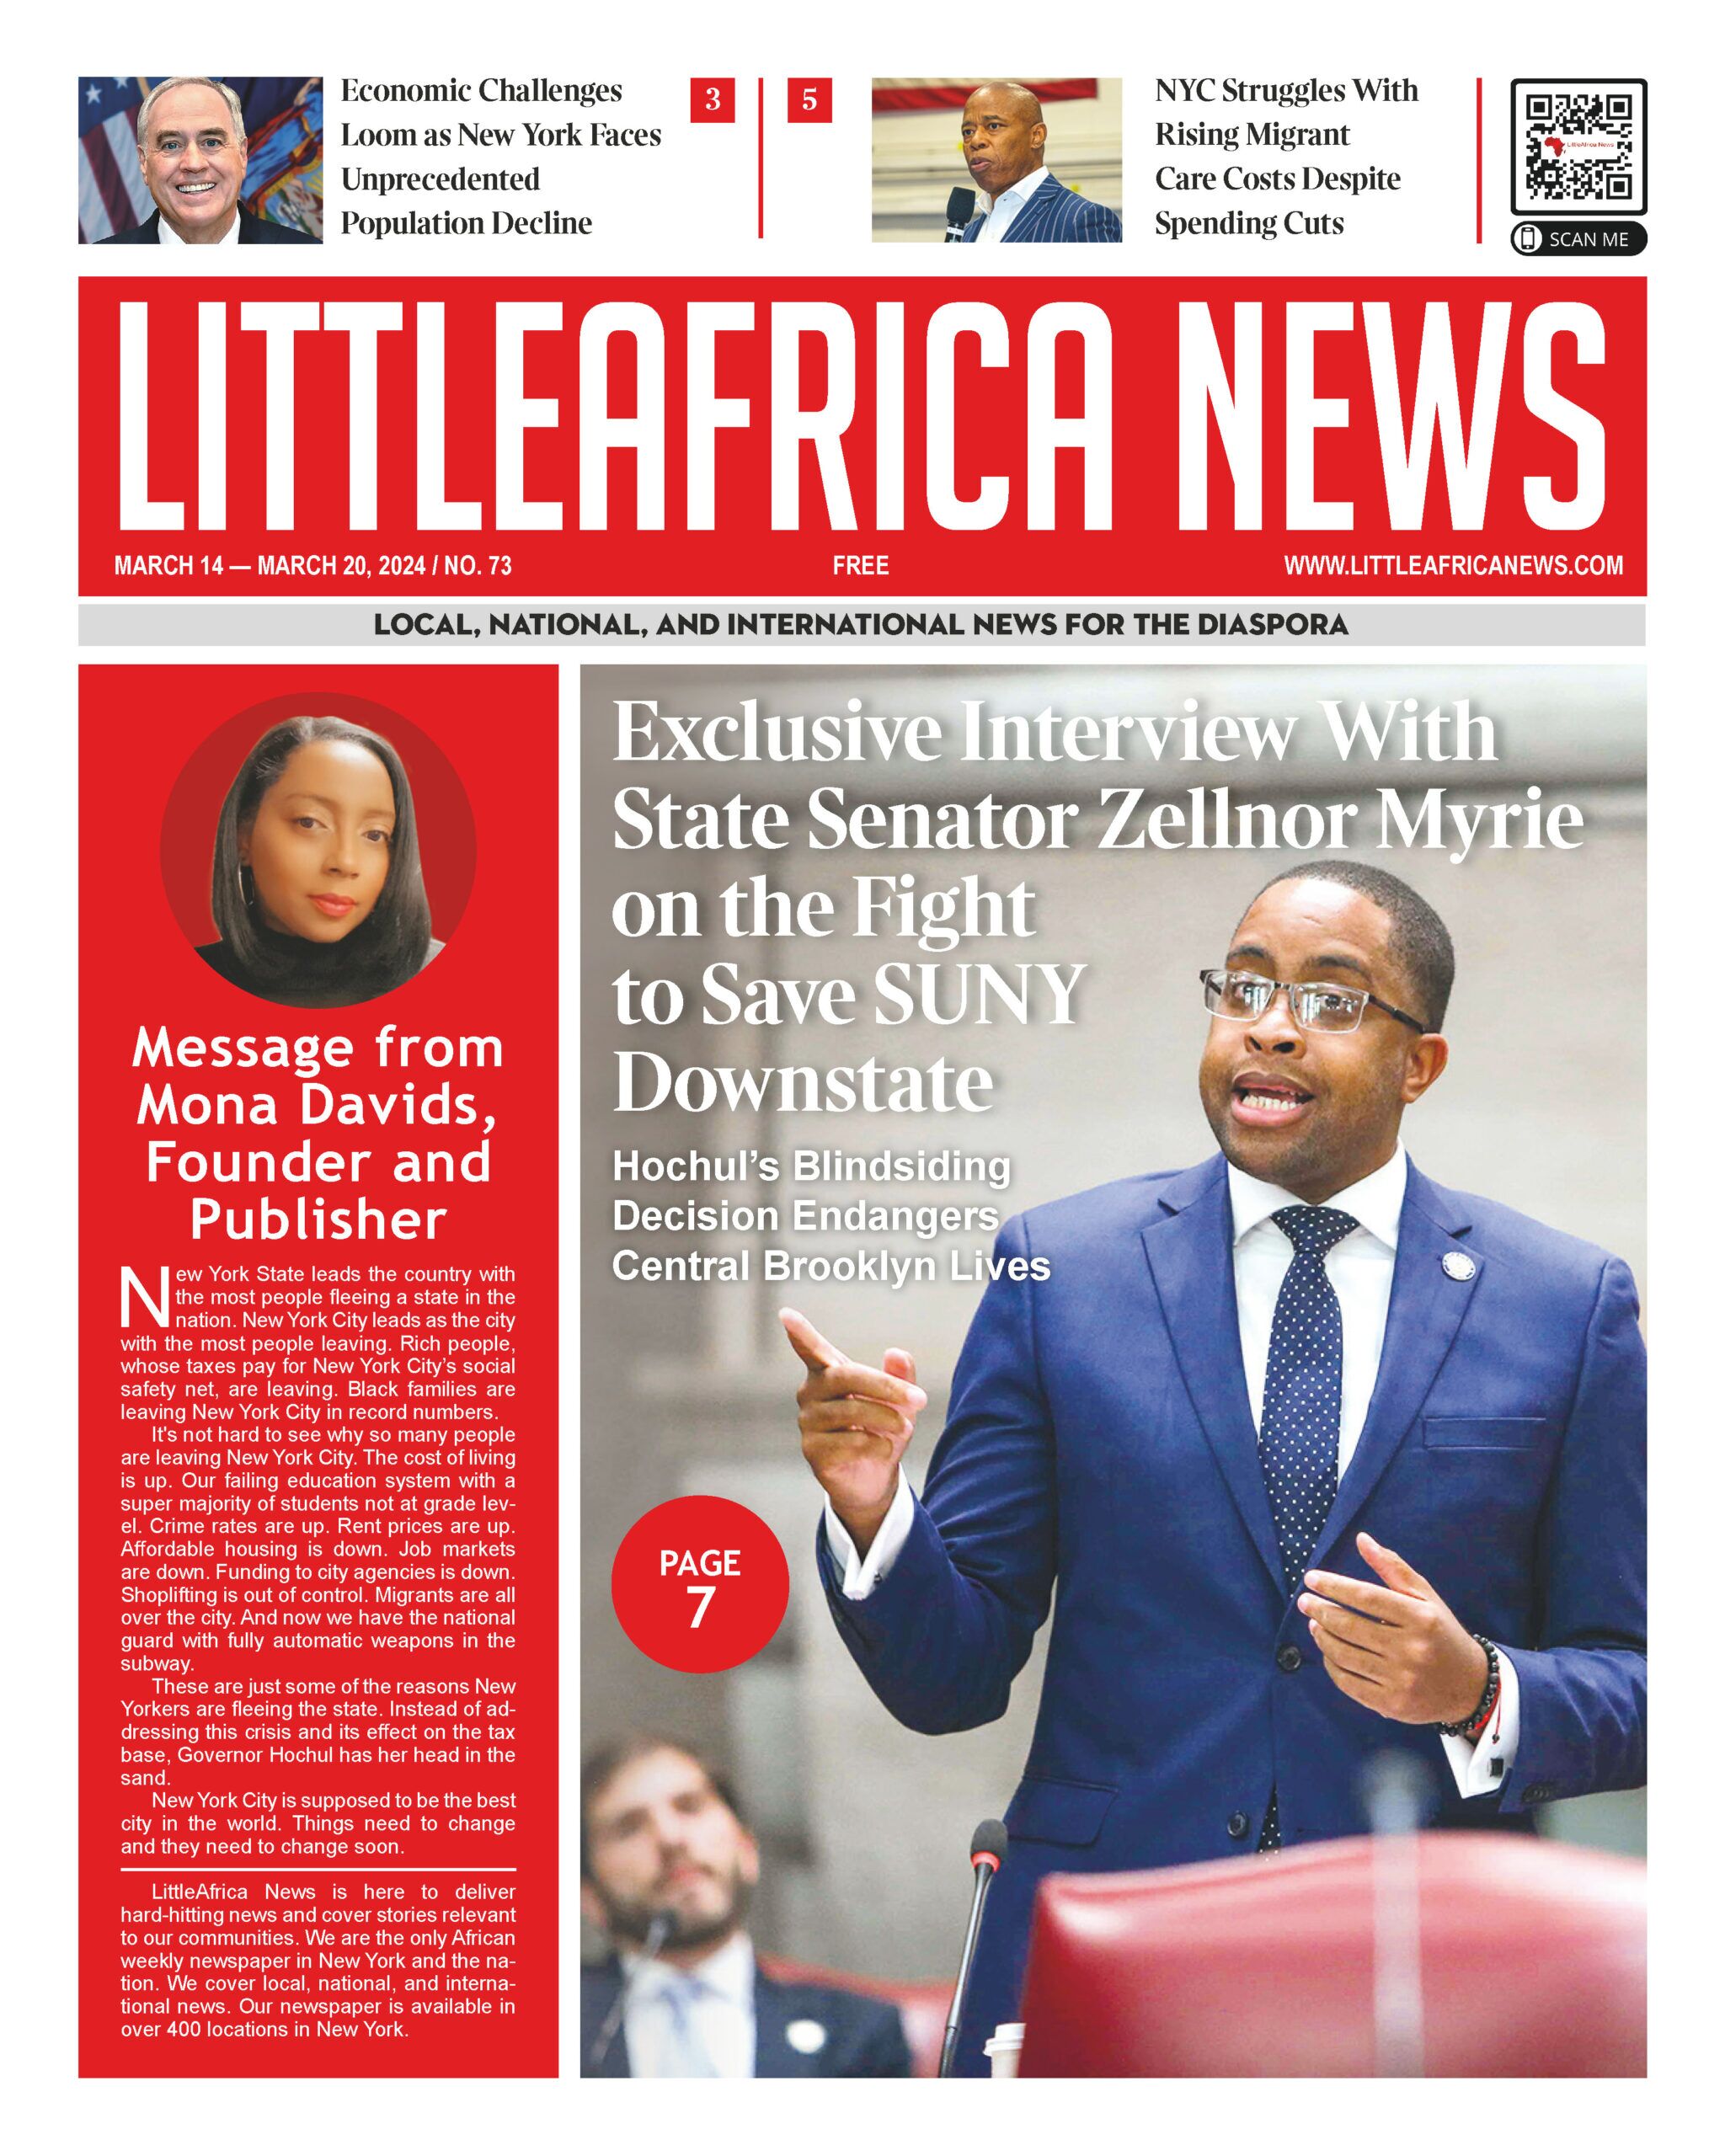 LittleAfrica News Newspaper Front Page-Zellnor Myrie